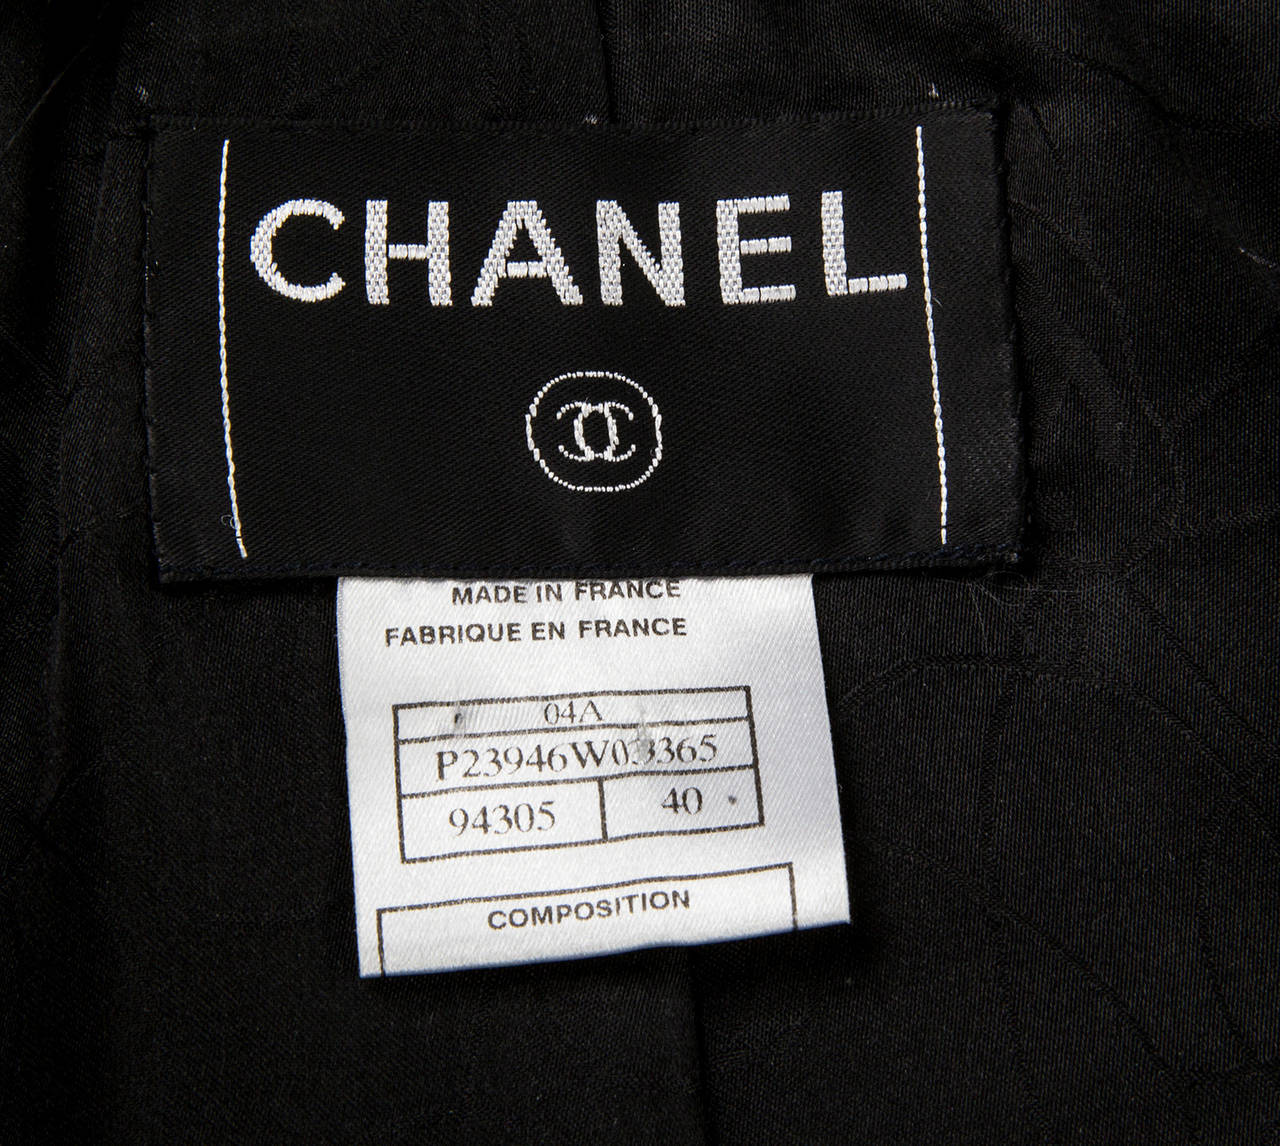 Iconic Chanel Black Lambskin Leather Jacket In Excellent Condition For Sale In Montreal, QC